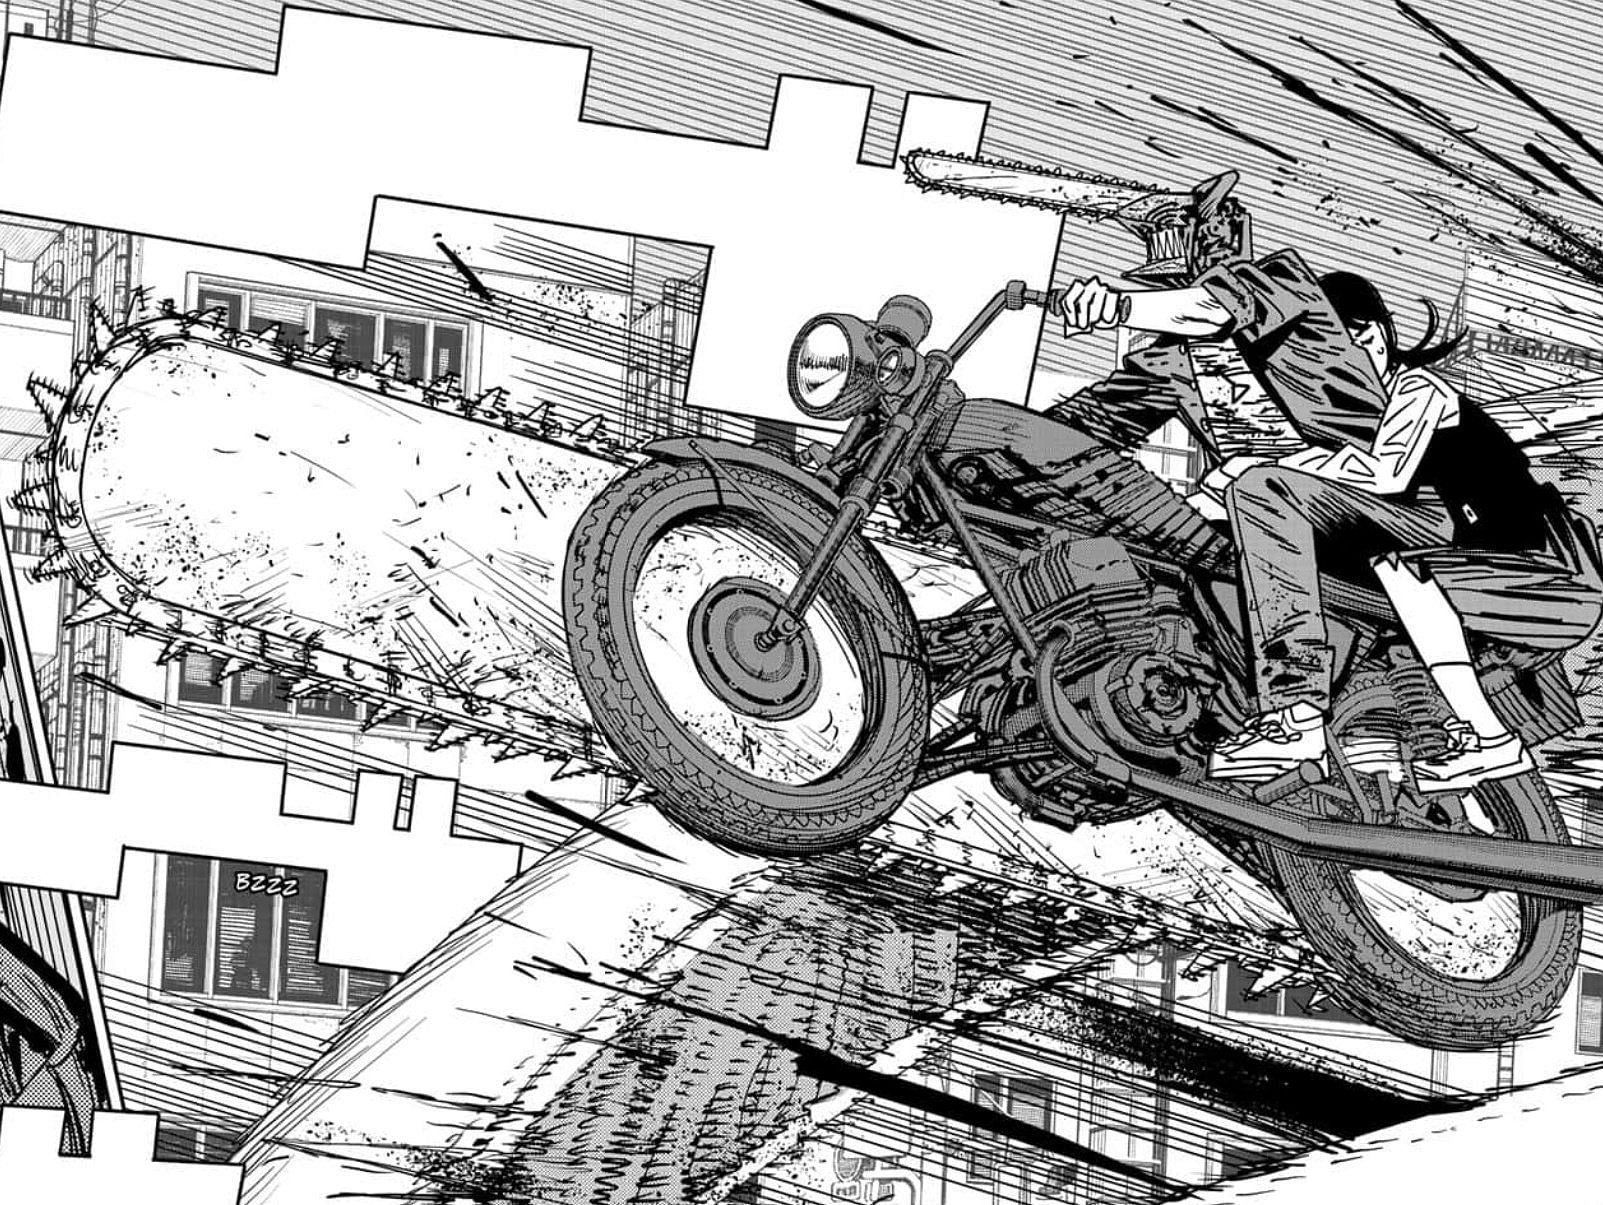 Chainsaw Man manga heats up with electrifying 'Chainsaw Motorcycle